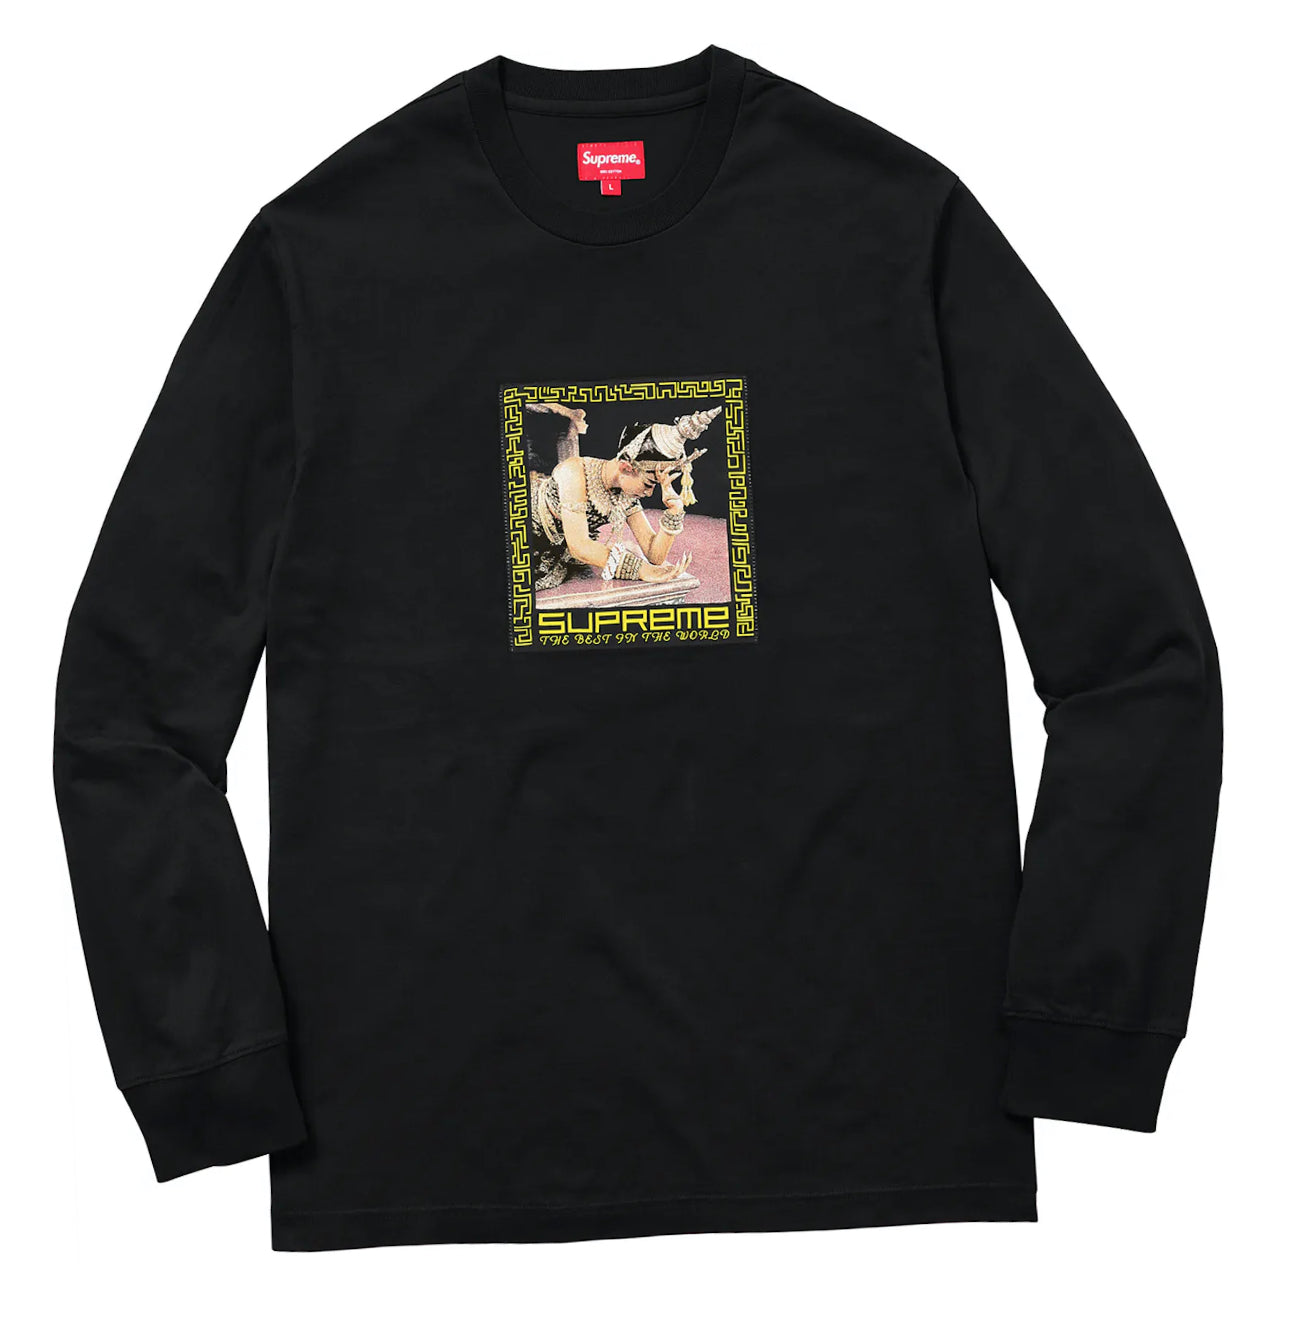 Brand new Black Long Sleeve Supreme Best in the World Size Large